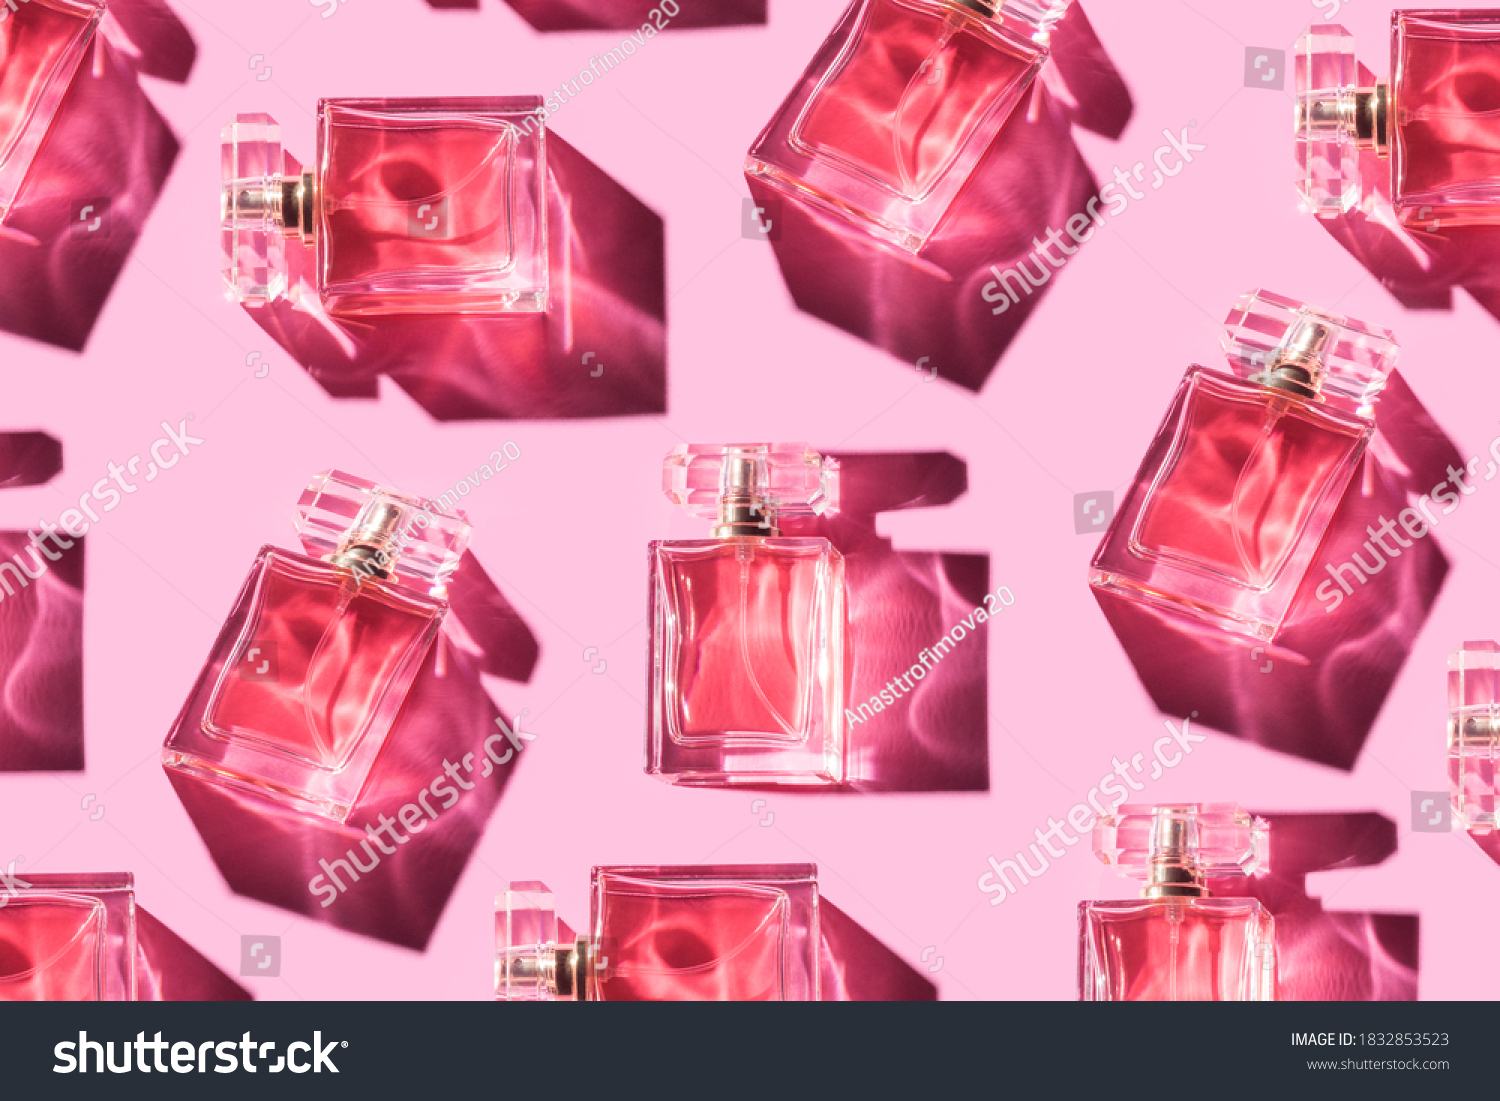 Pattern bottles of woman perfume on a pastel pink background, top view, flat lay. Mockup of pink fragrance perfume bottle mockup on pastel pink empty background #1832853523